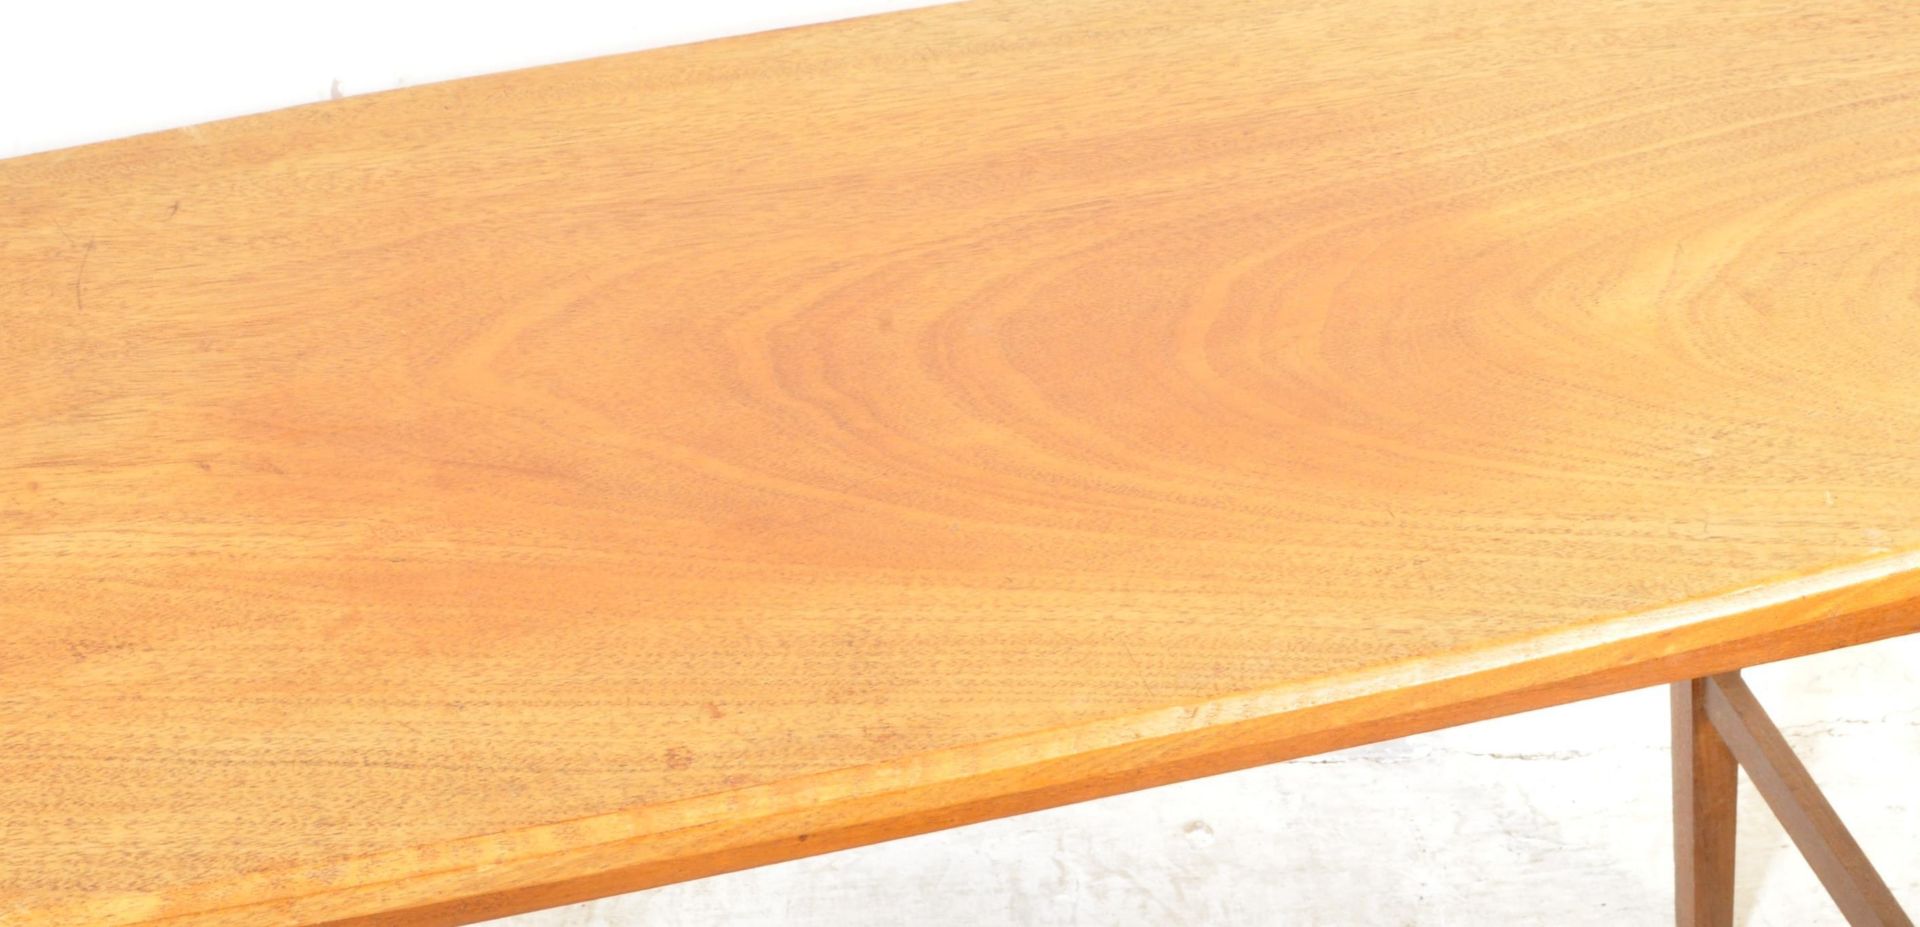 COLLECTION OF THREE MID CENTURY TEAK COFFEE TABLES - Image 2 of 5